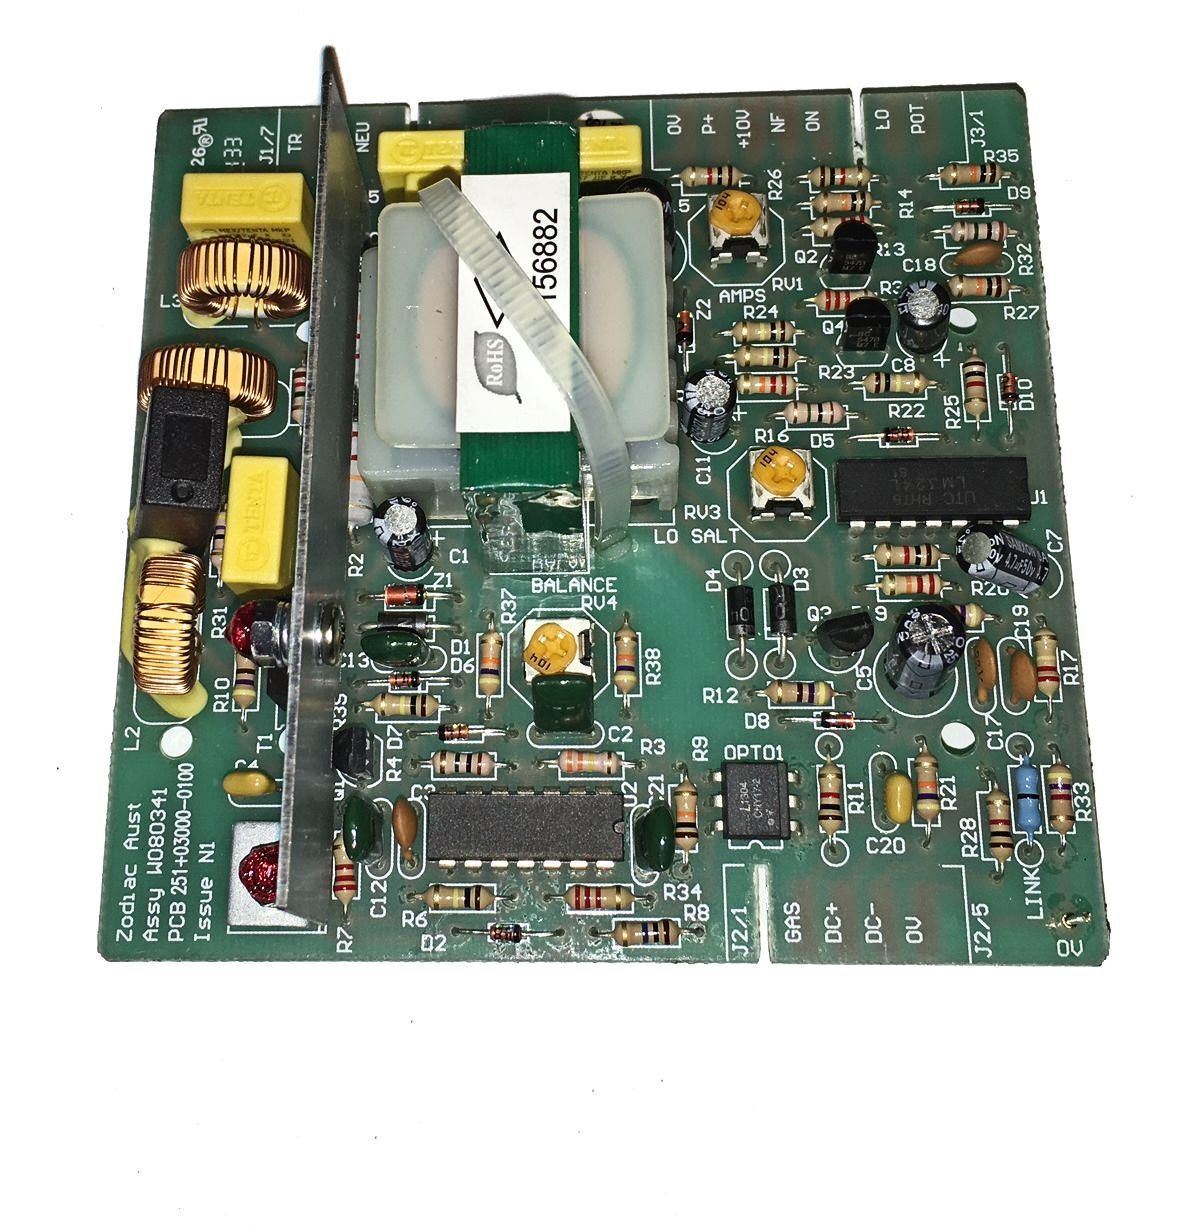 C Series Clearwater-Saltmaster control board